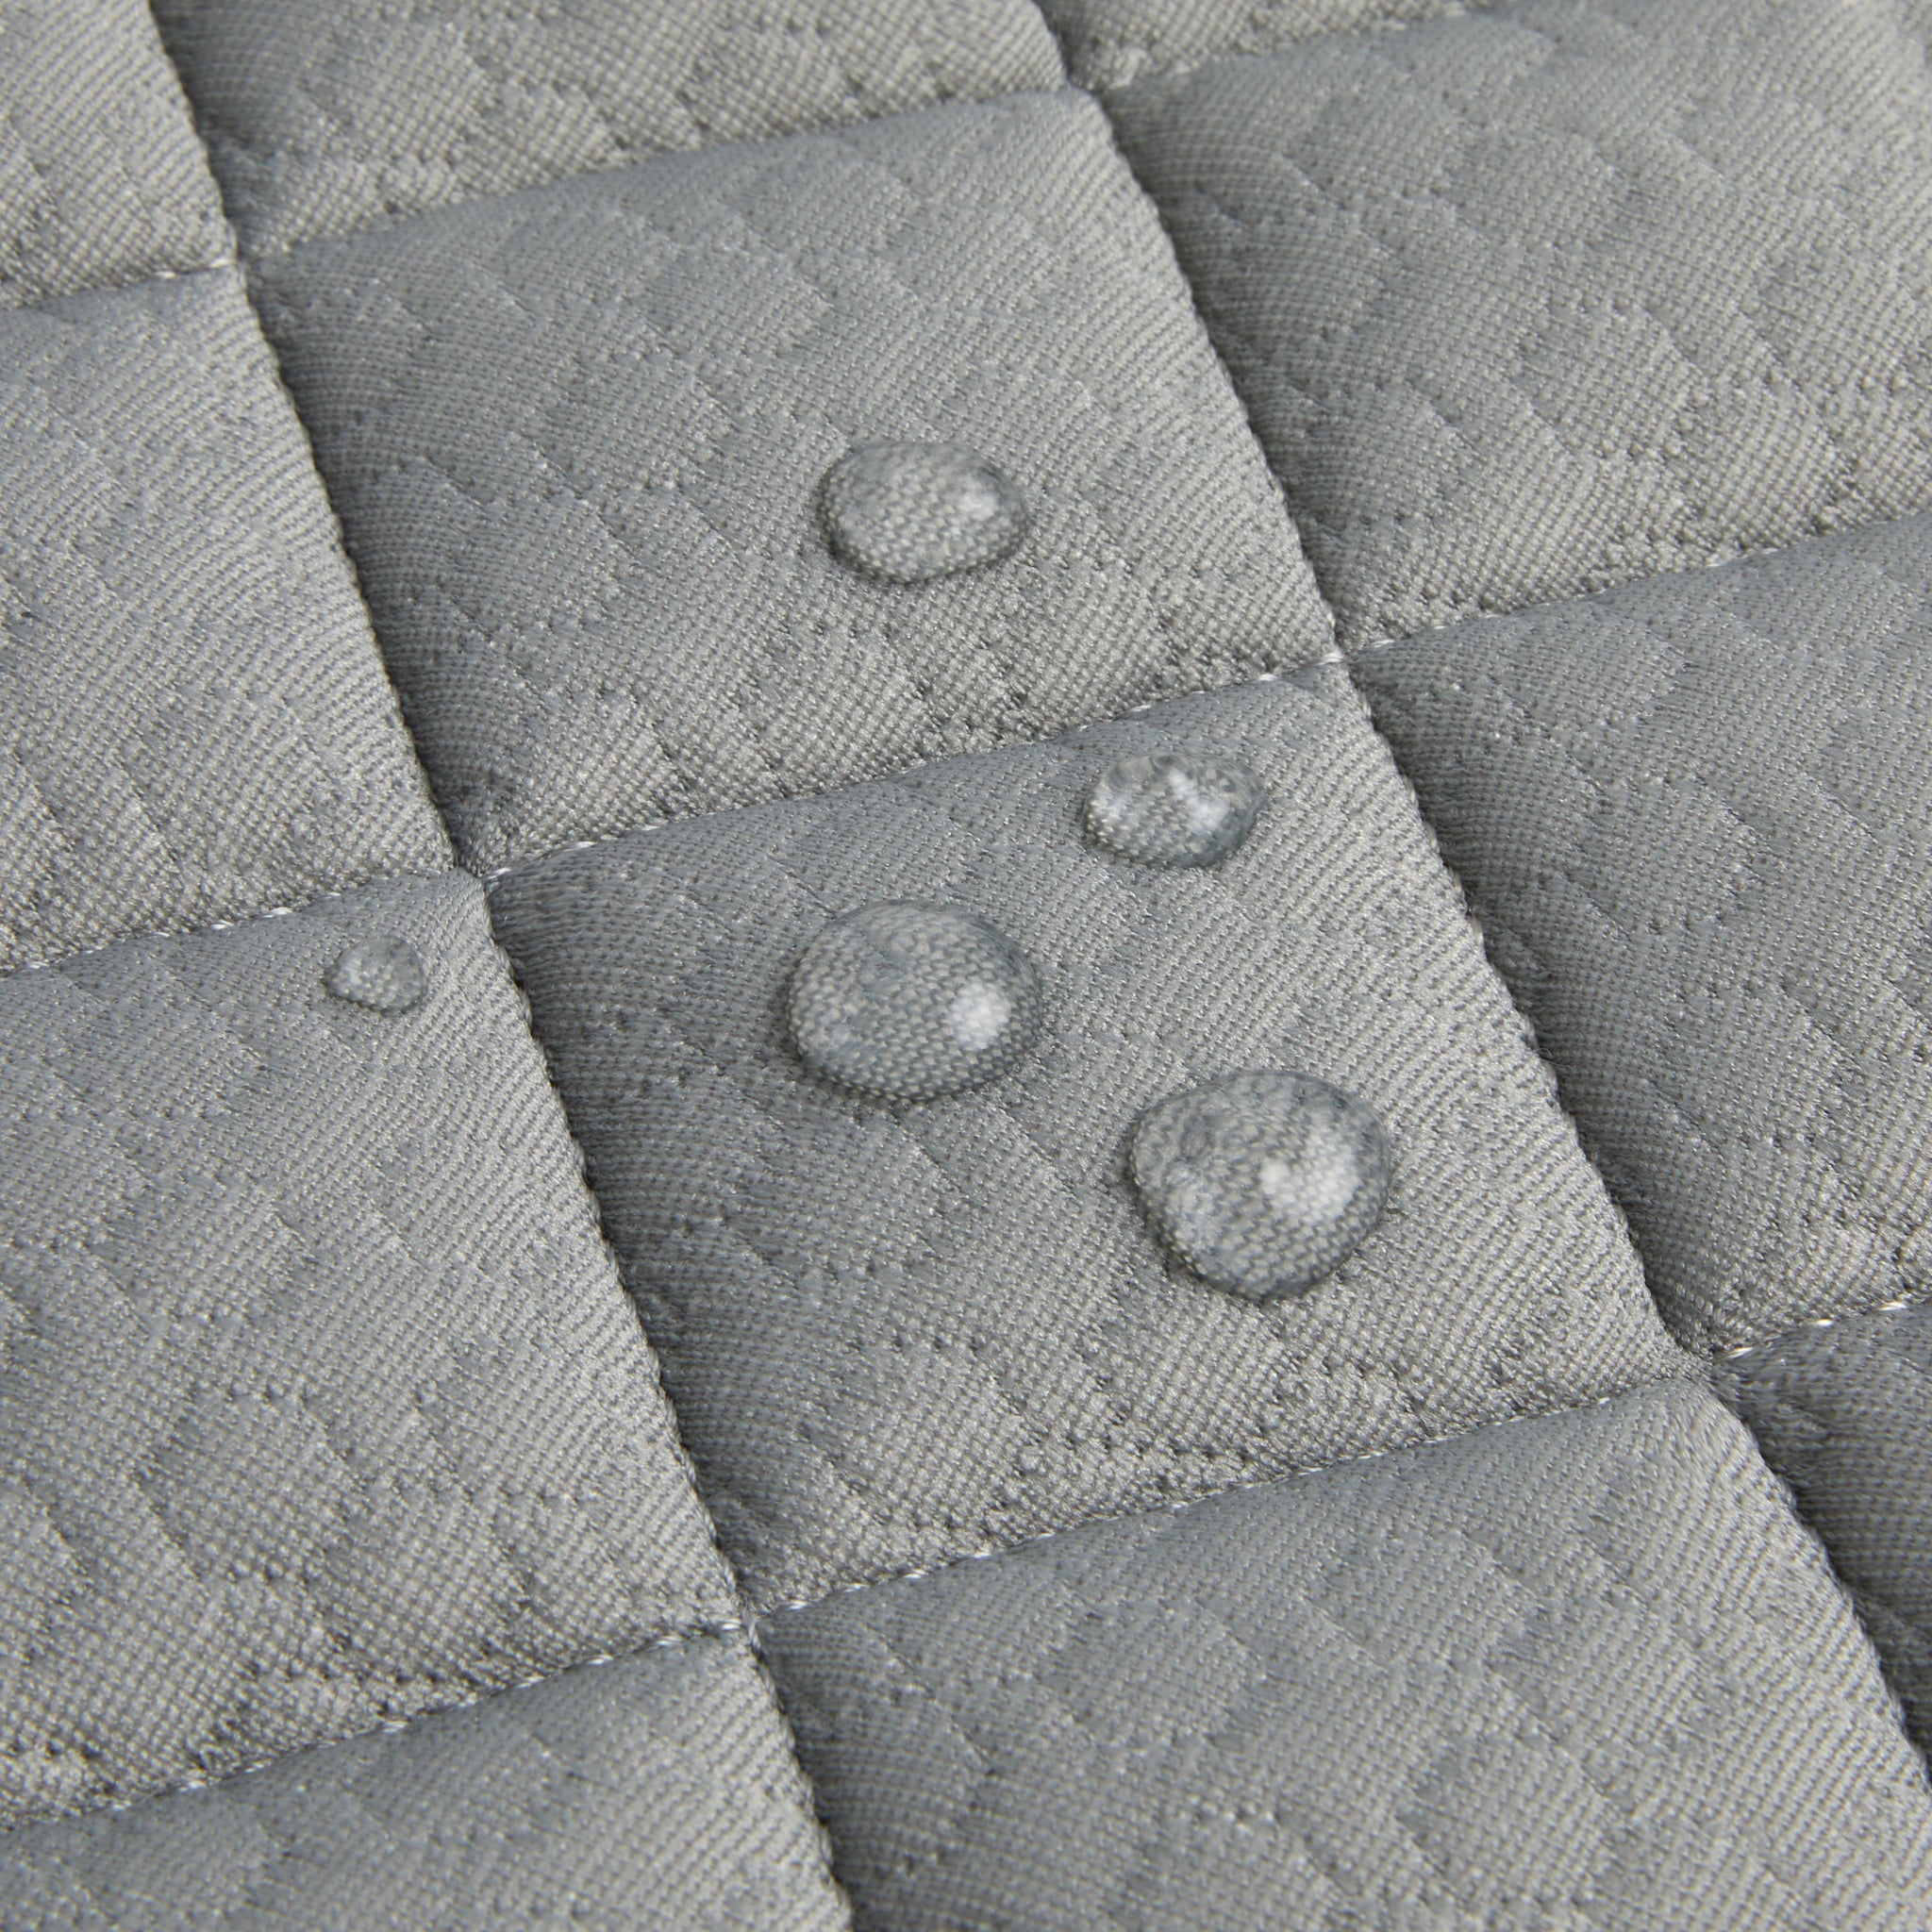 Close-up view of water-resistant liner surface